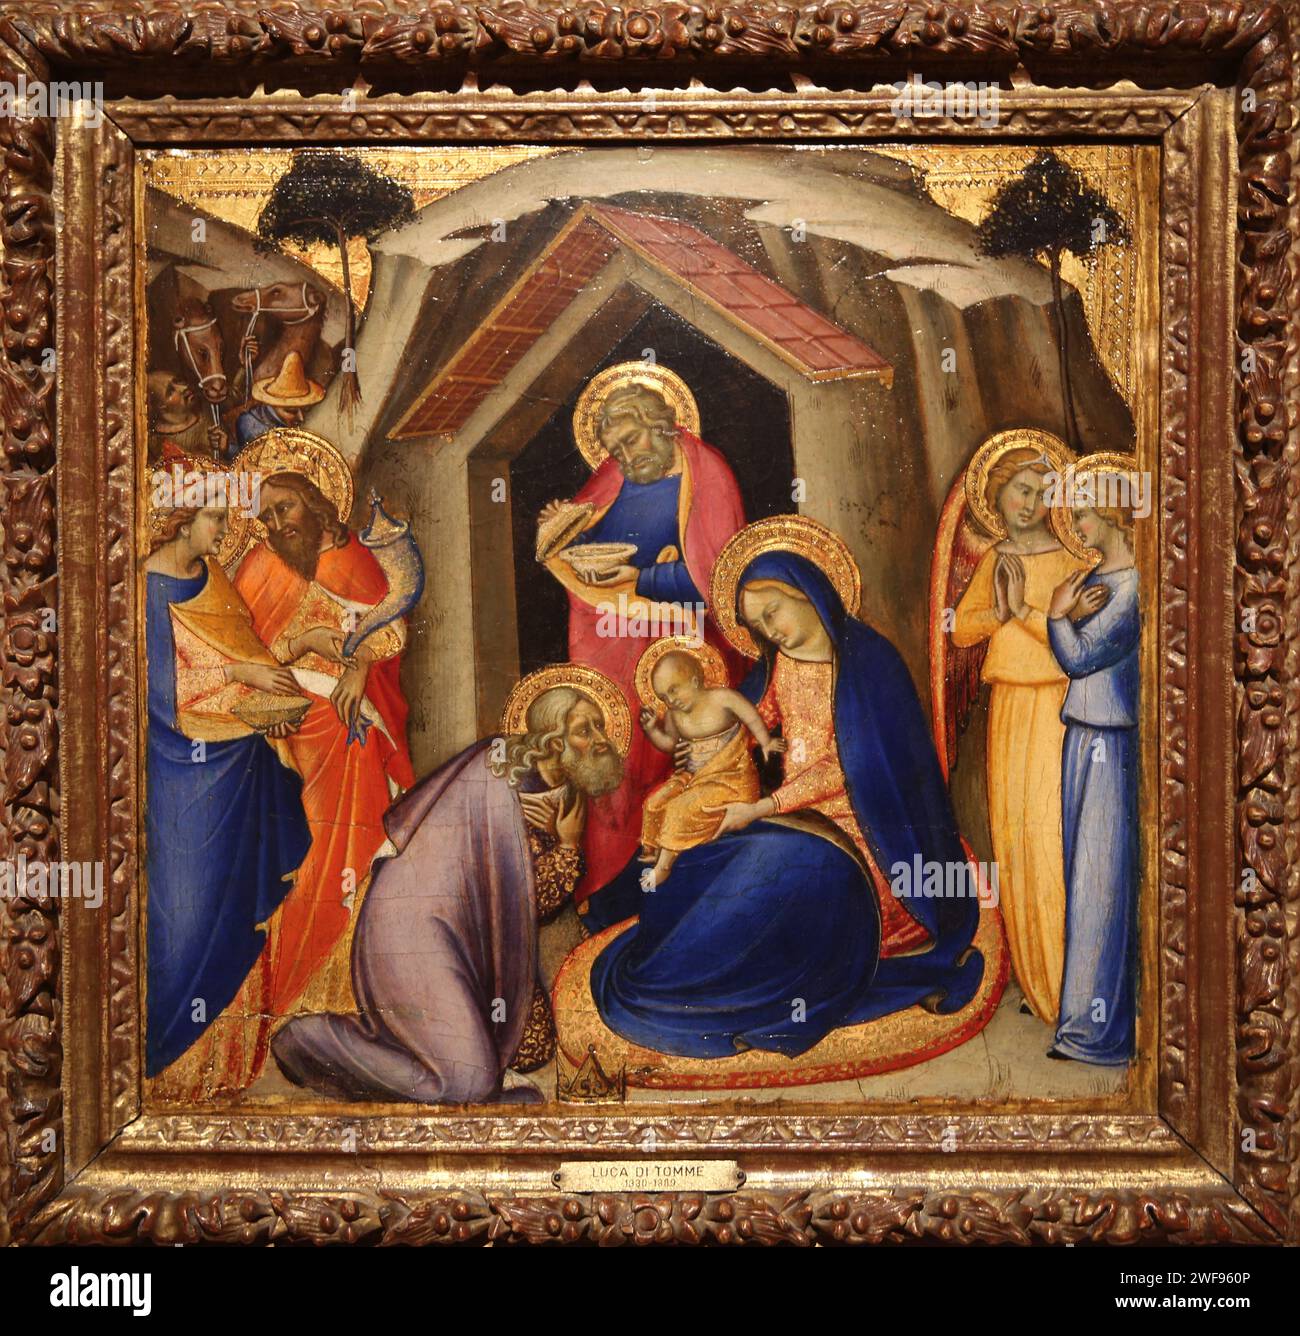 Luca di Tommè (c. 1330-1389). Italian painter. 'The Adoration of the Magi'. C. 1360-1365. Tempera and gold on panel. Thyssen. Madrid. Spain. Stock Photo